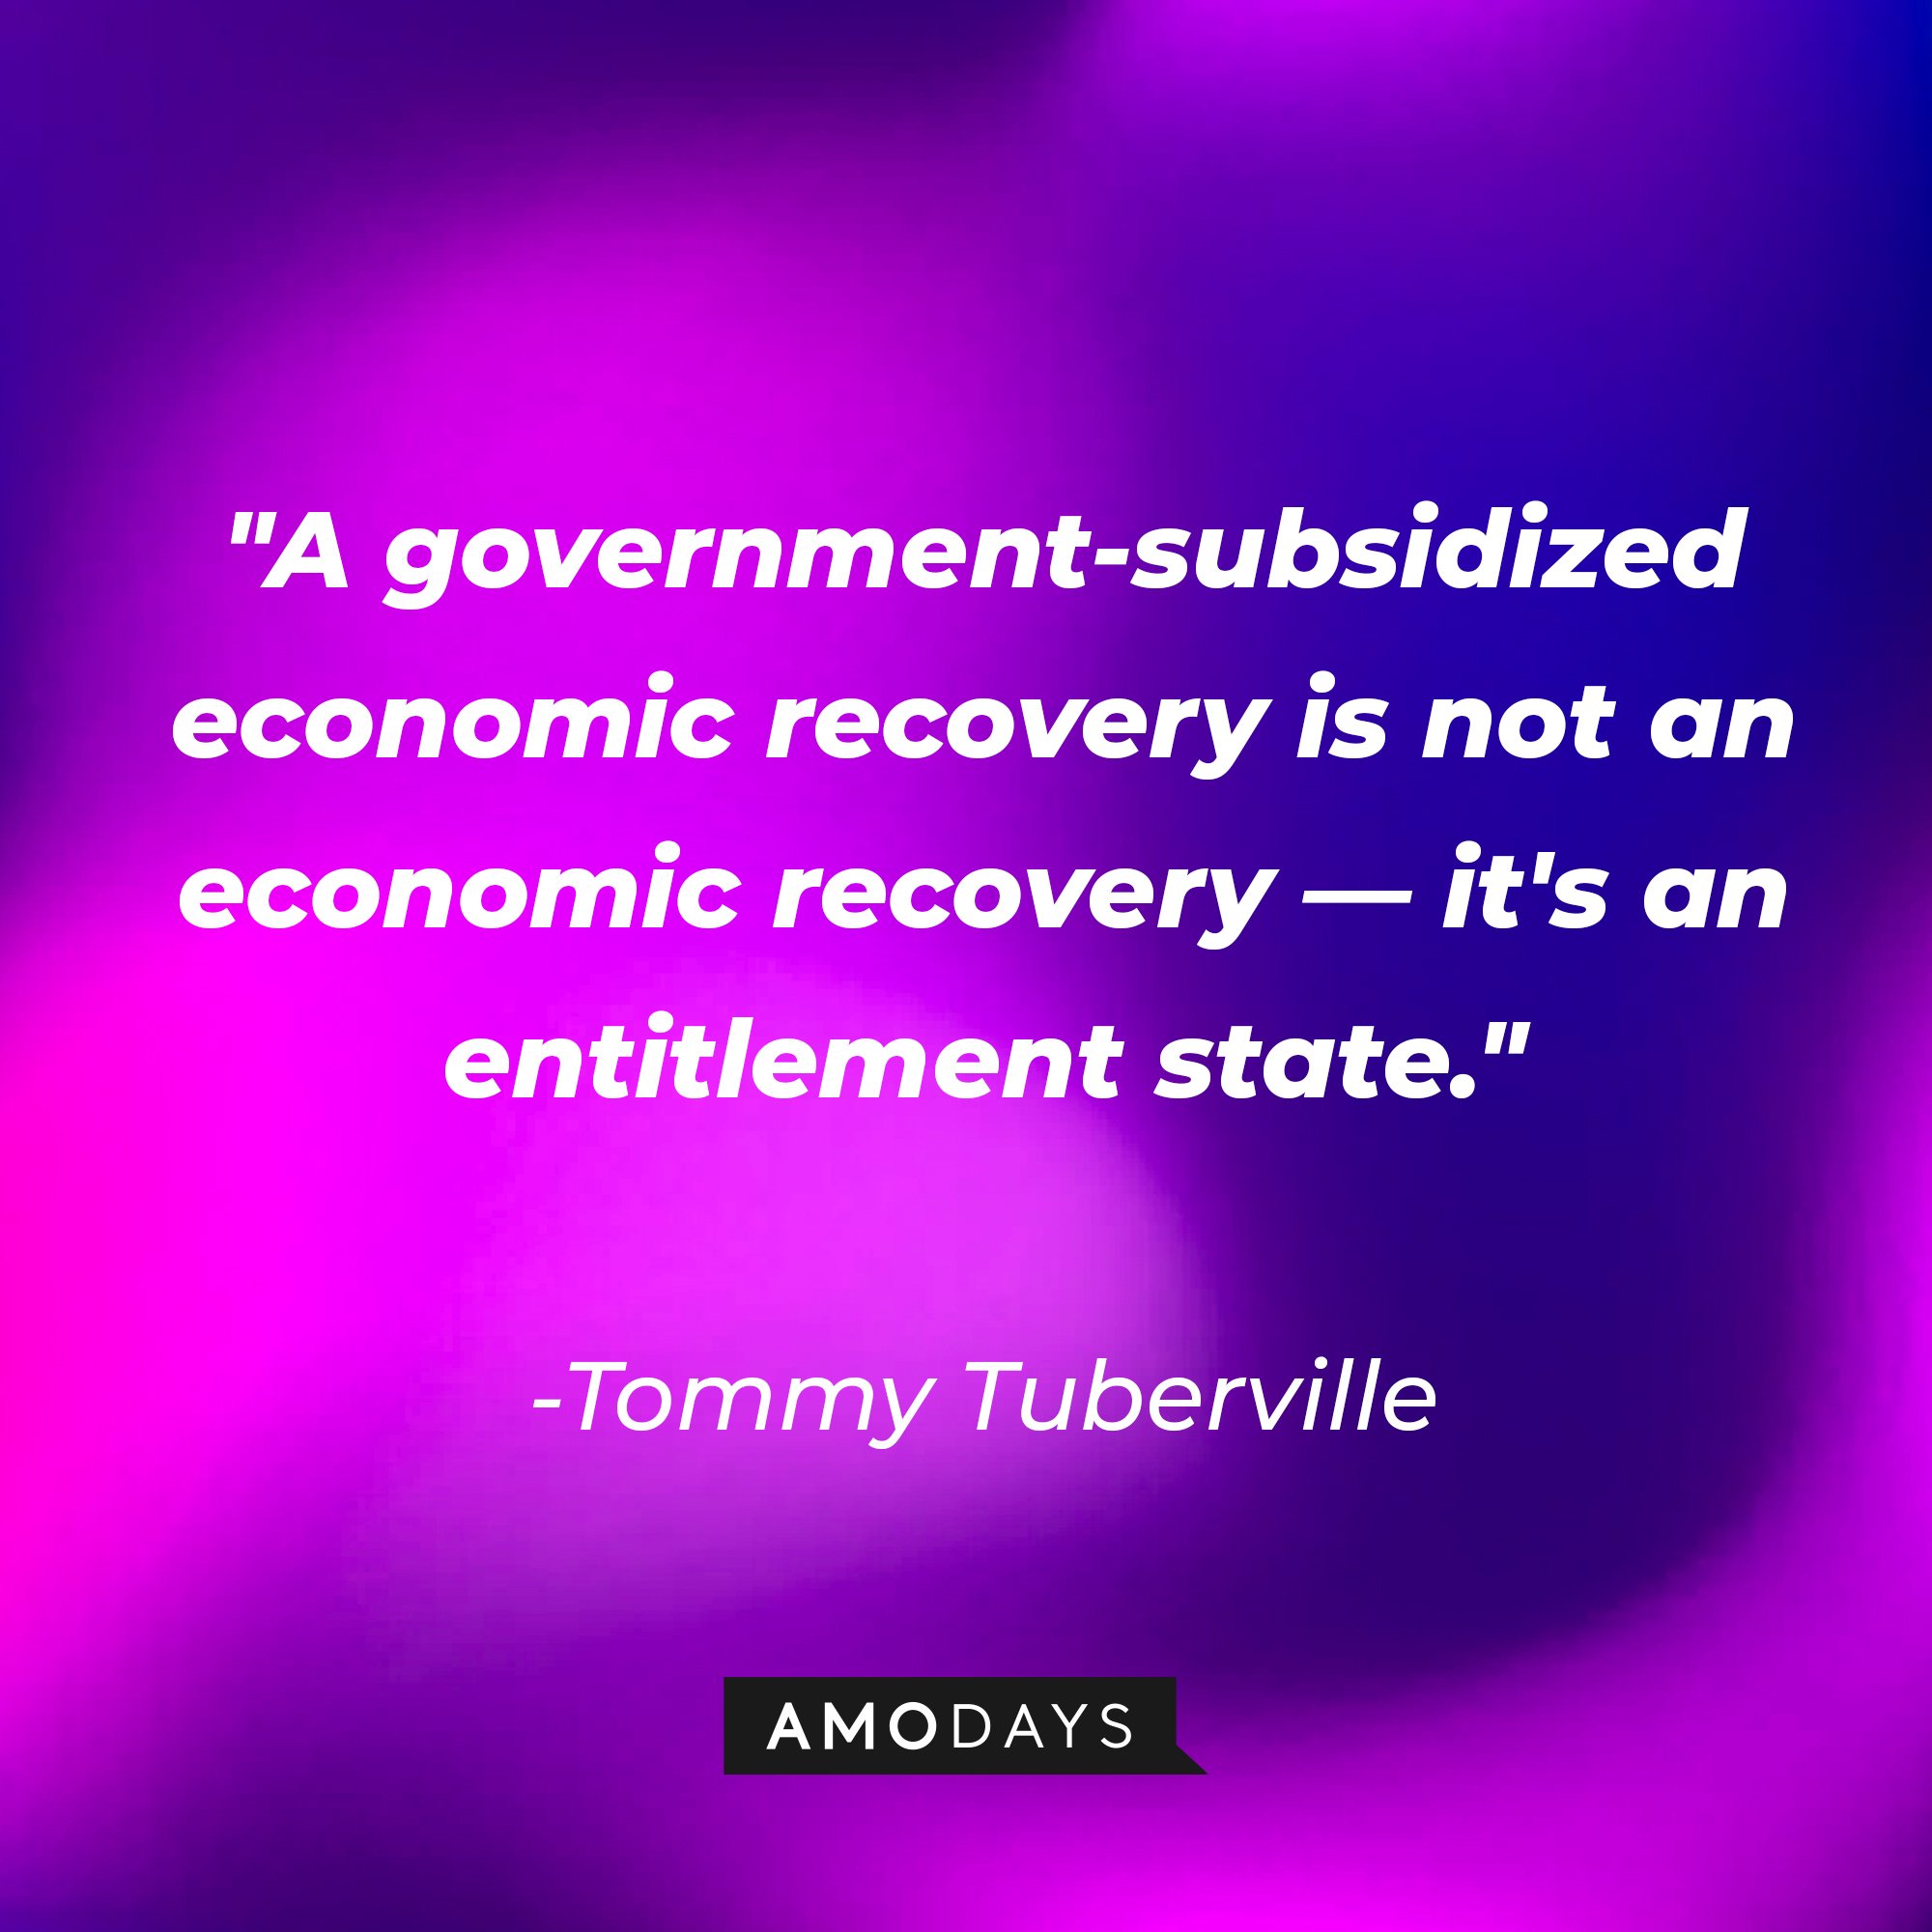 Tommy Tuberville’s quote: "A government-subsidized economic recovery is not an economic recovery—it's an entitlement state." | Image: AmoDays